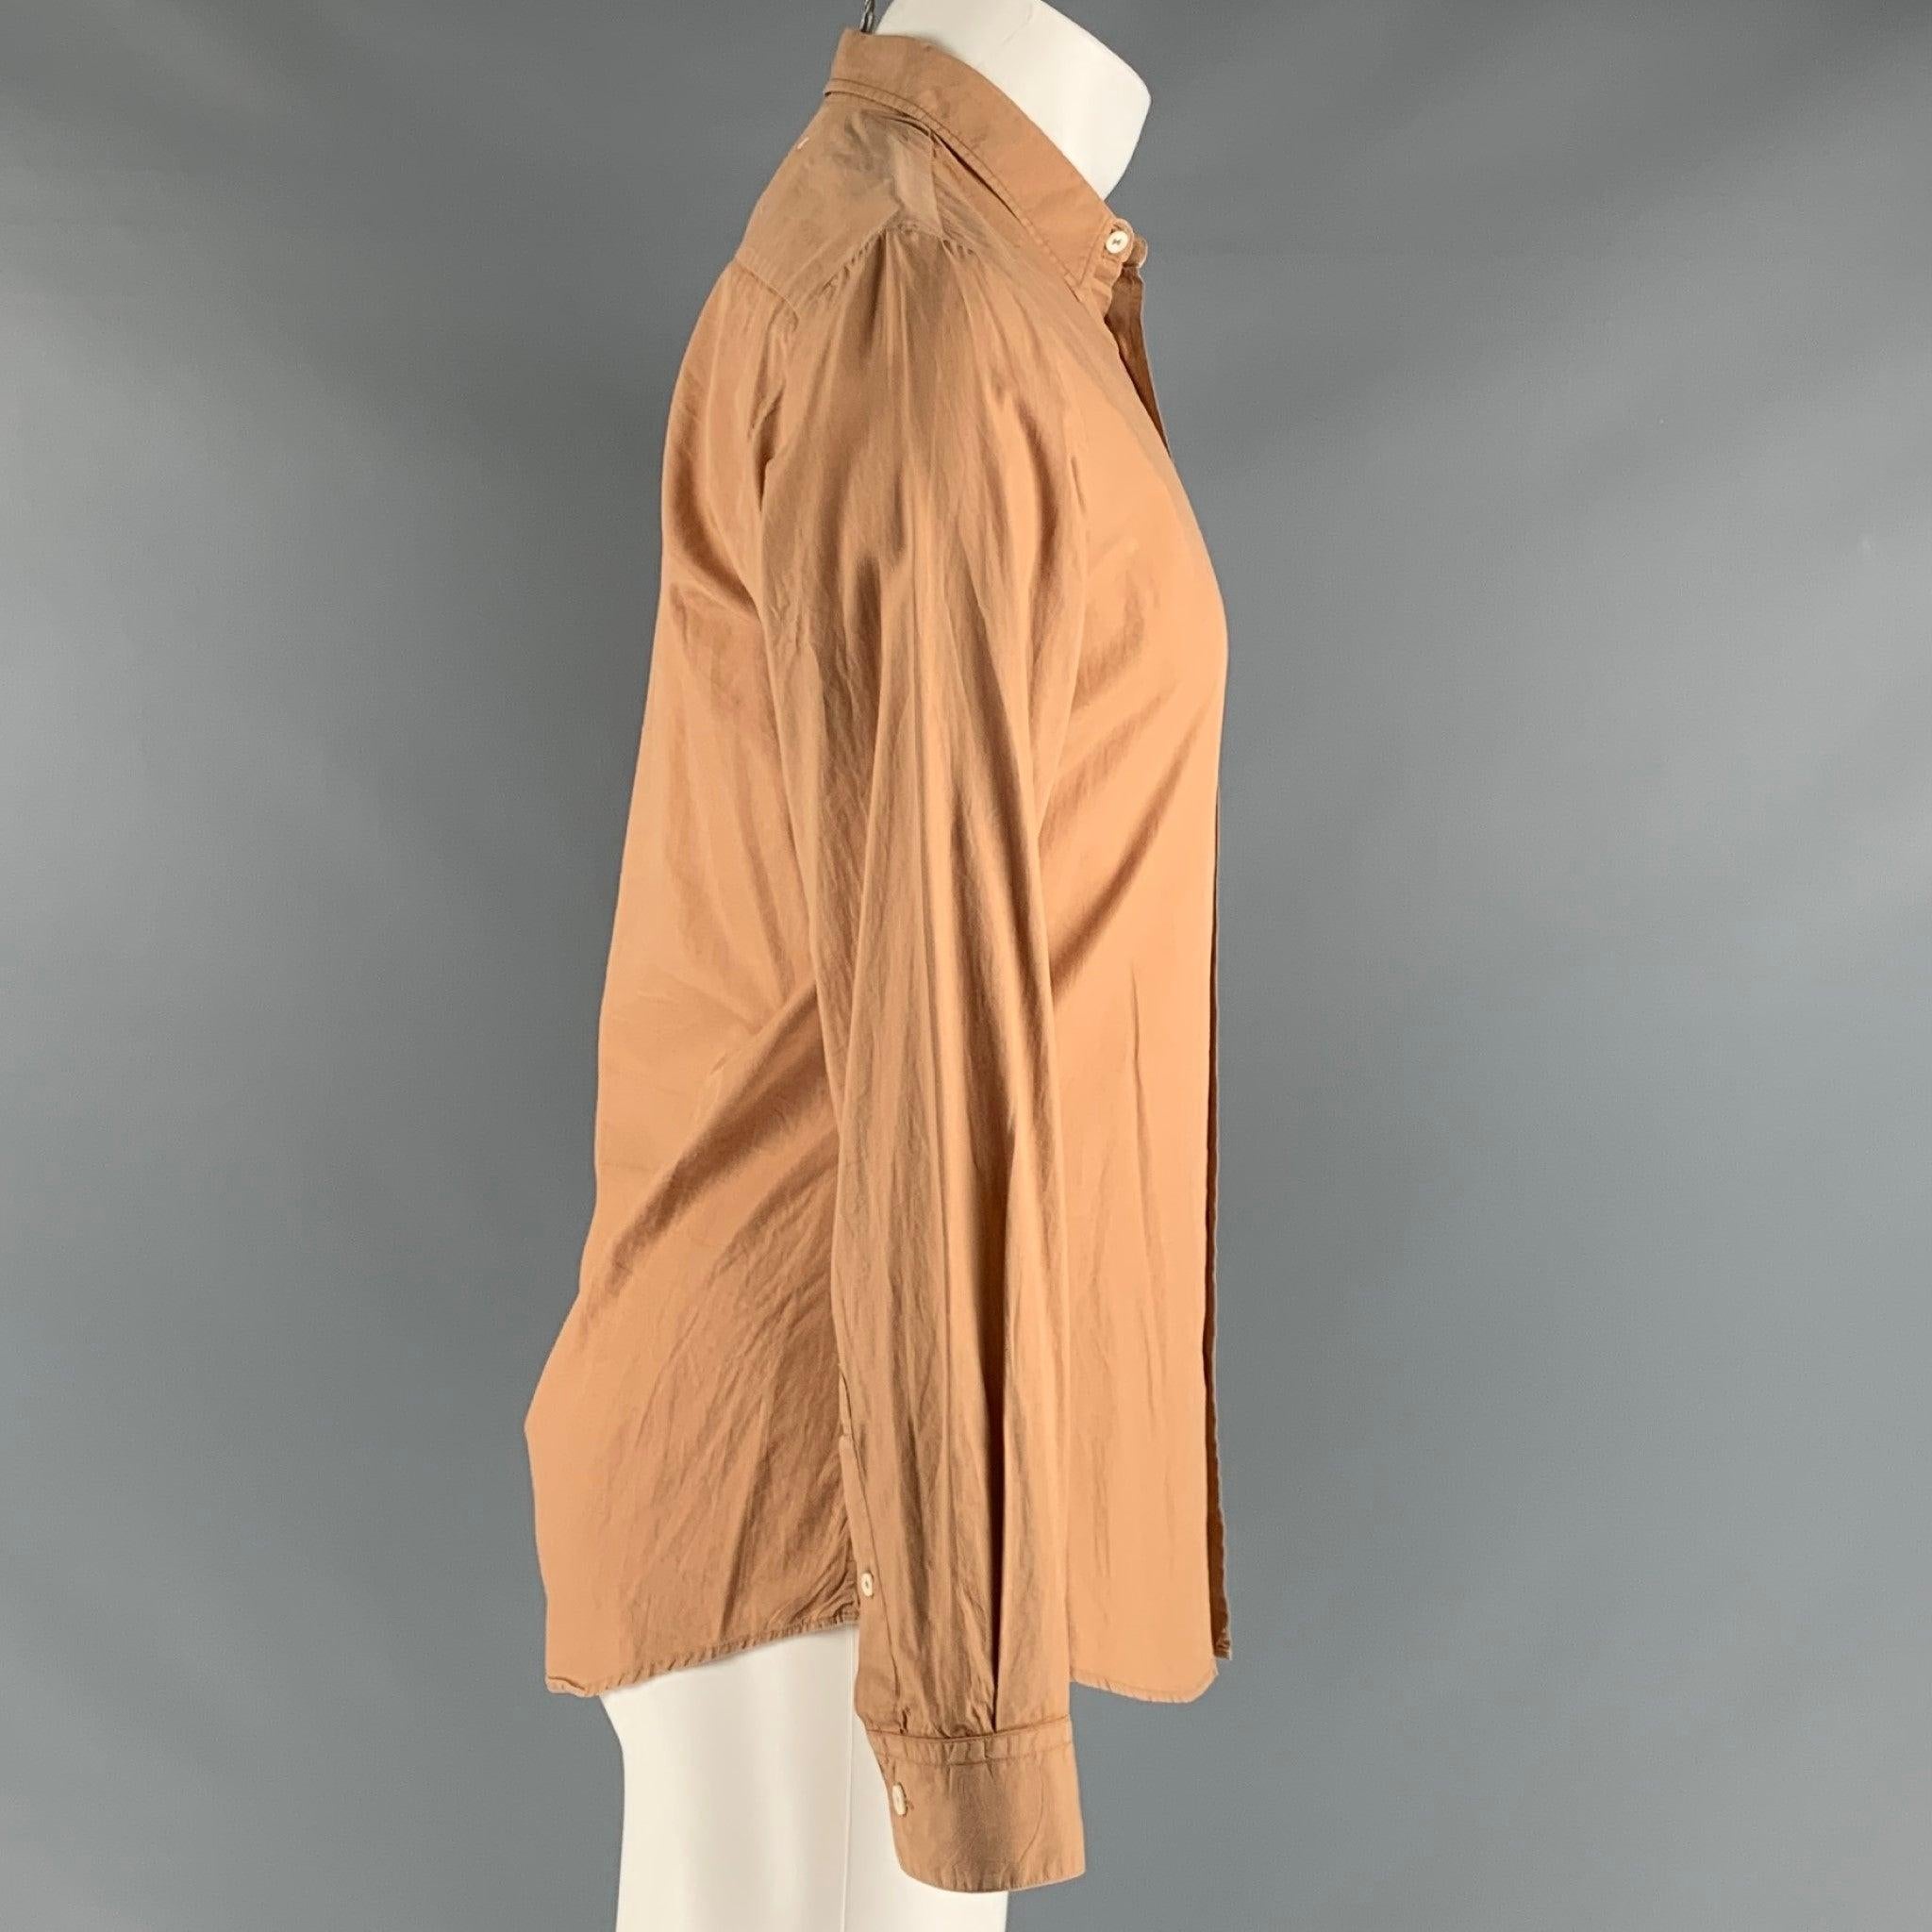 MAISON MARTIN MARGIELA long sleeve shirt comes in an orange cotton woven material featuring a straight collar, and a button up closure. Very Good Pre-Owned Condition. 

Marked:   10- 44 

Measurements: 
 
Shoulder: 17 inches Chest: 41 inches 